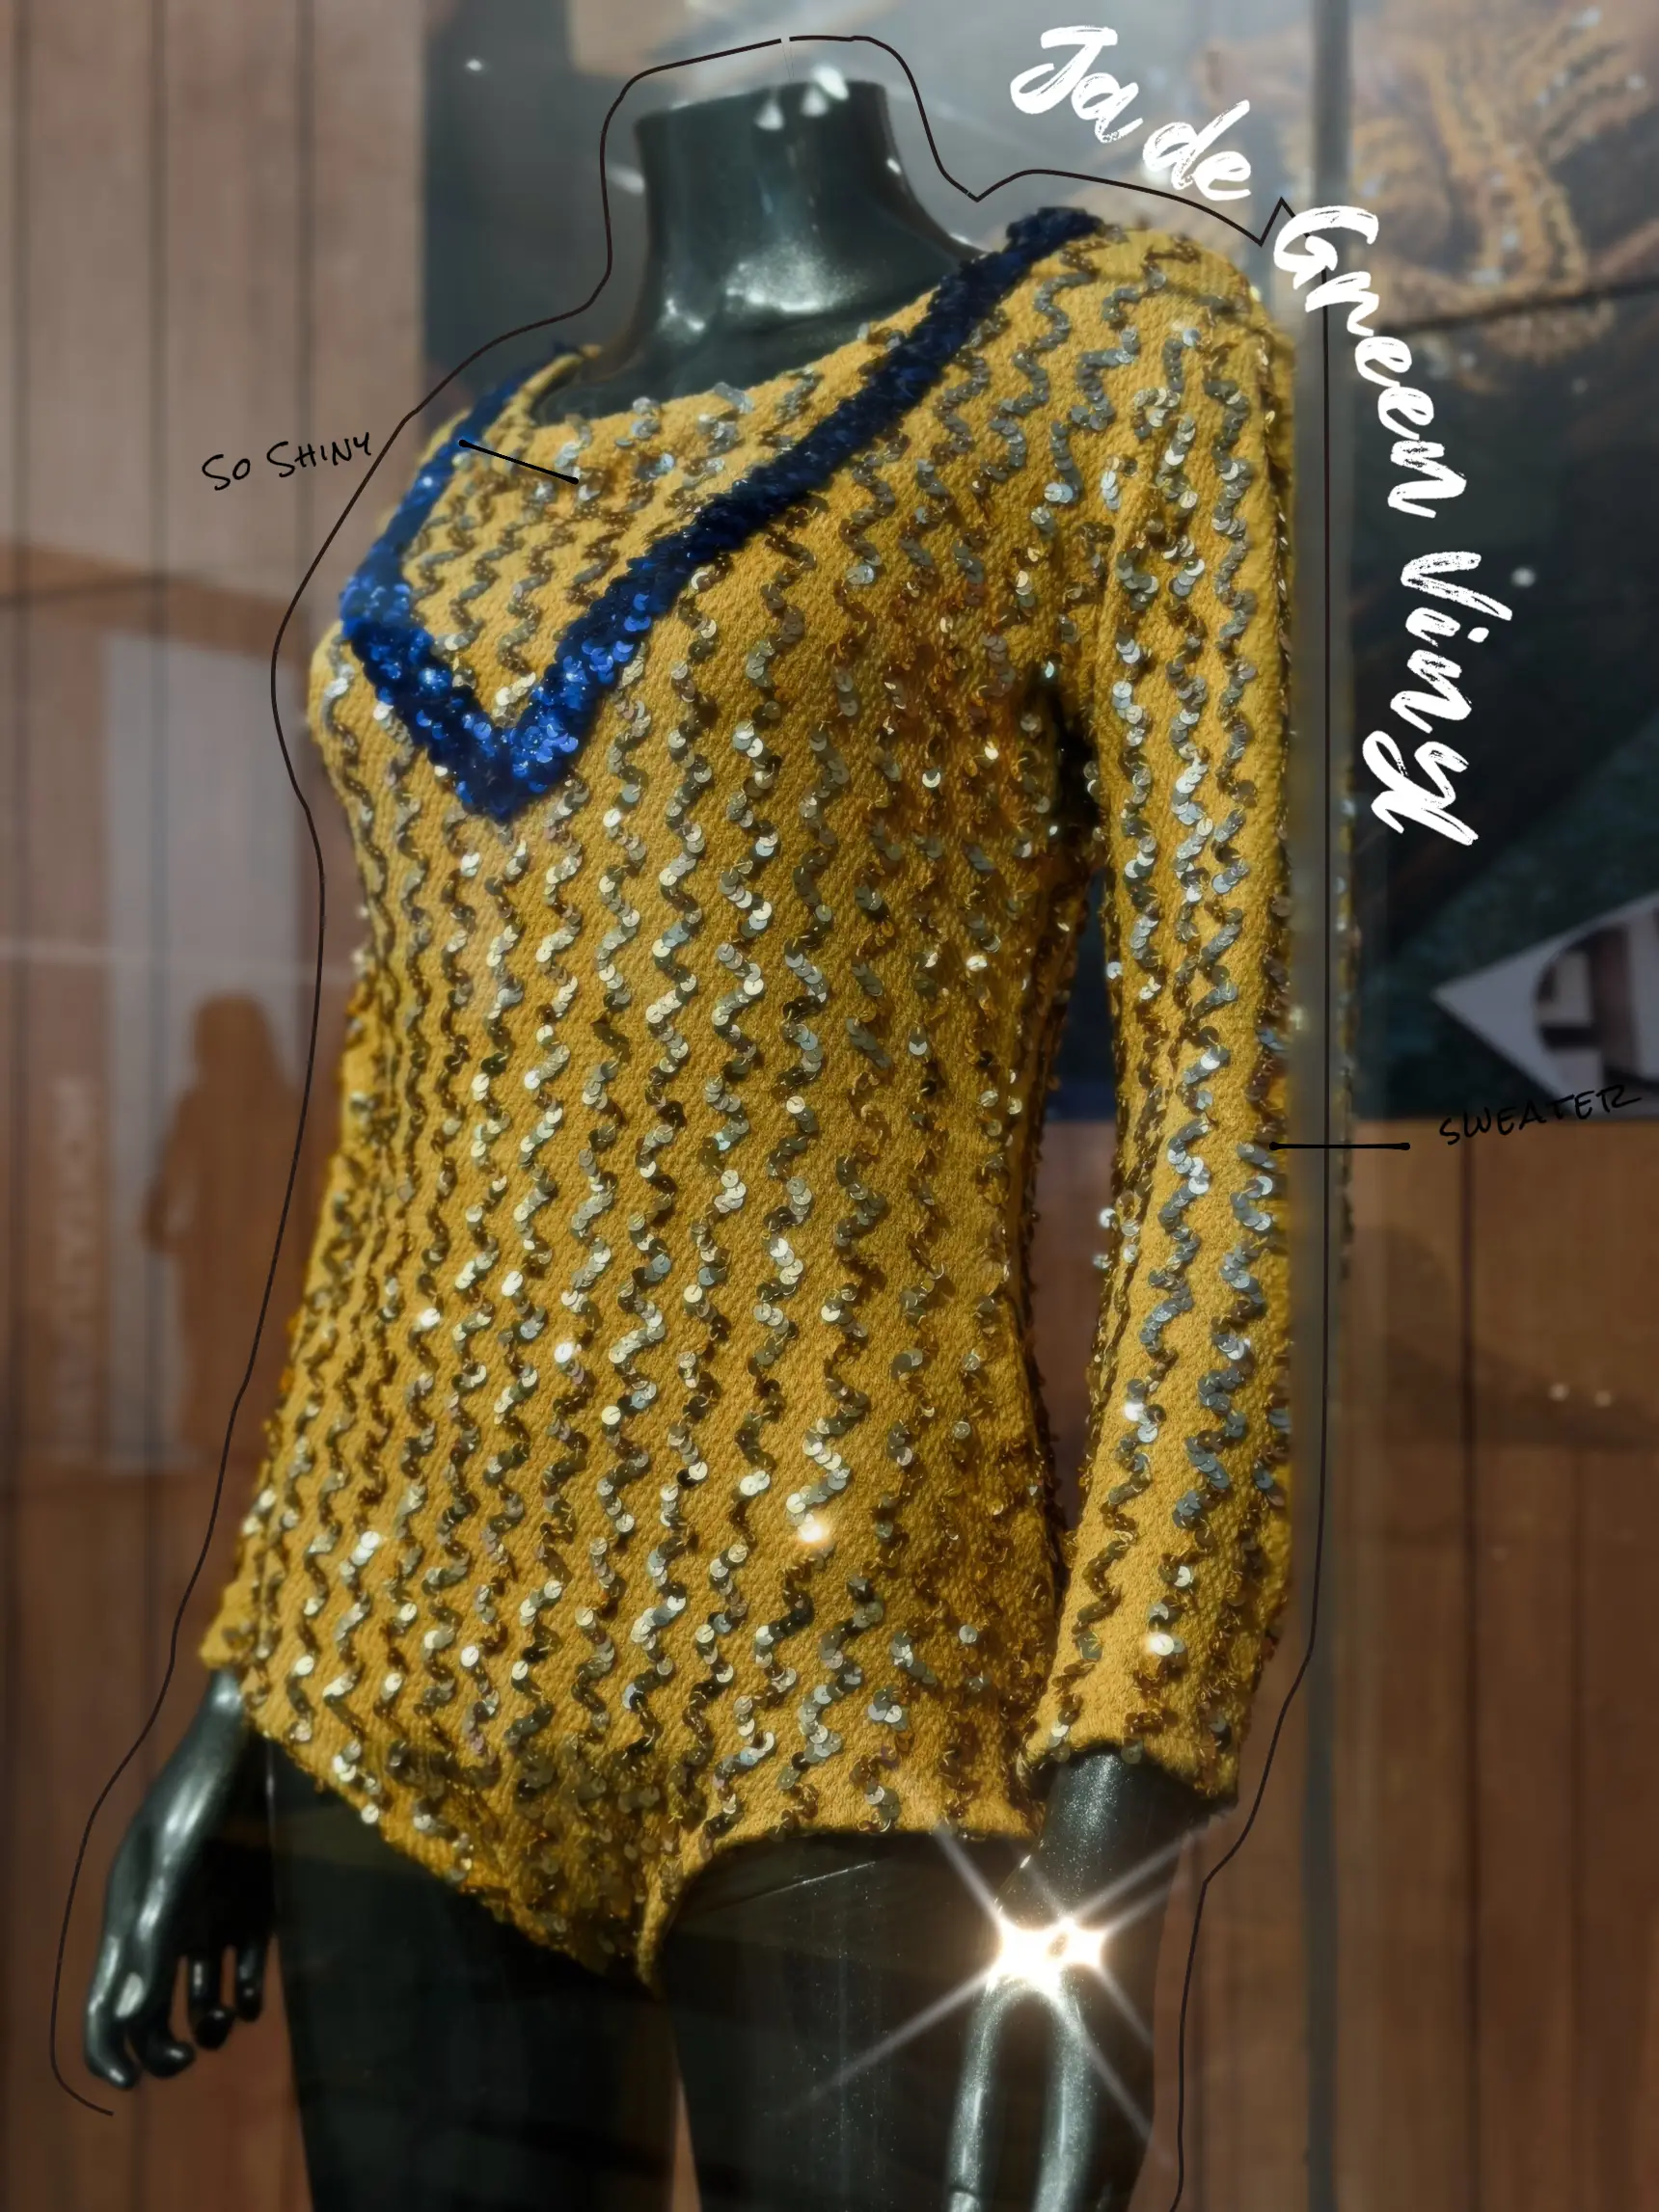  A mannequin wearing a blue sweater with a blue shirt underneath.